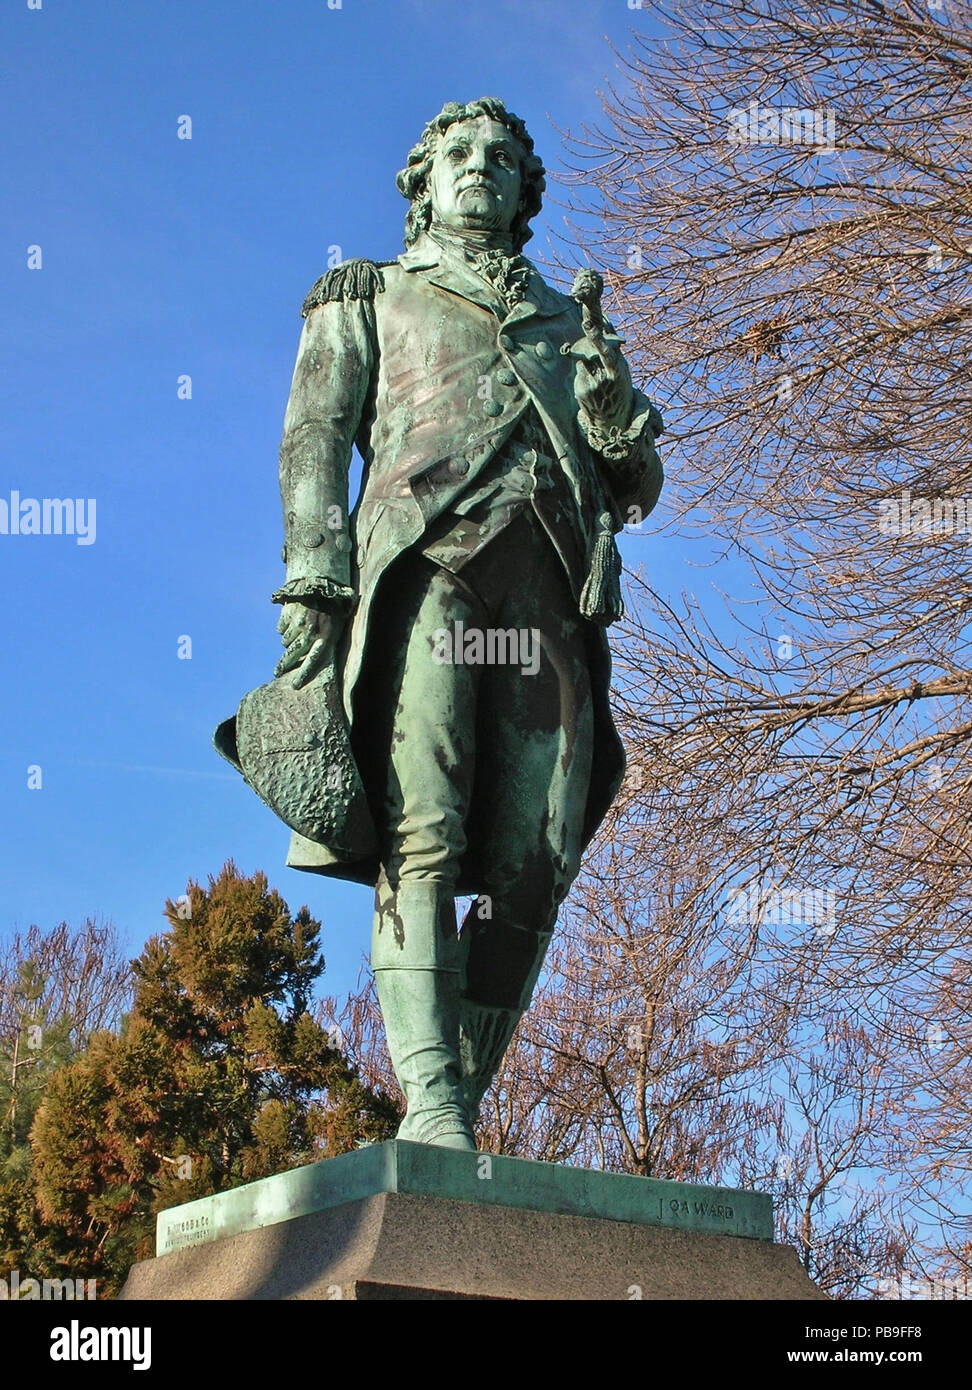 1571 Statue of Israel Putnam by John Quincy Adams Ward in Bushnell Park, Hartford, CT - January 2016 Stock Photo